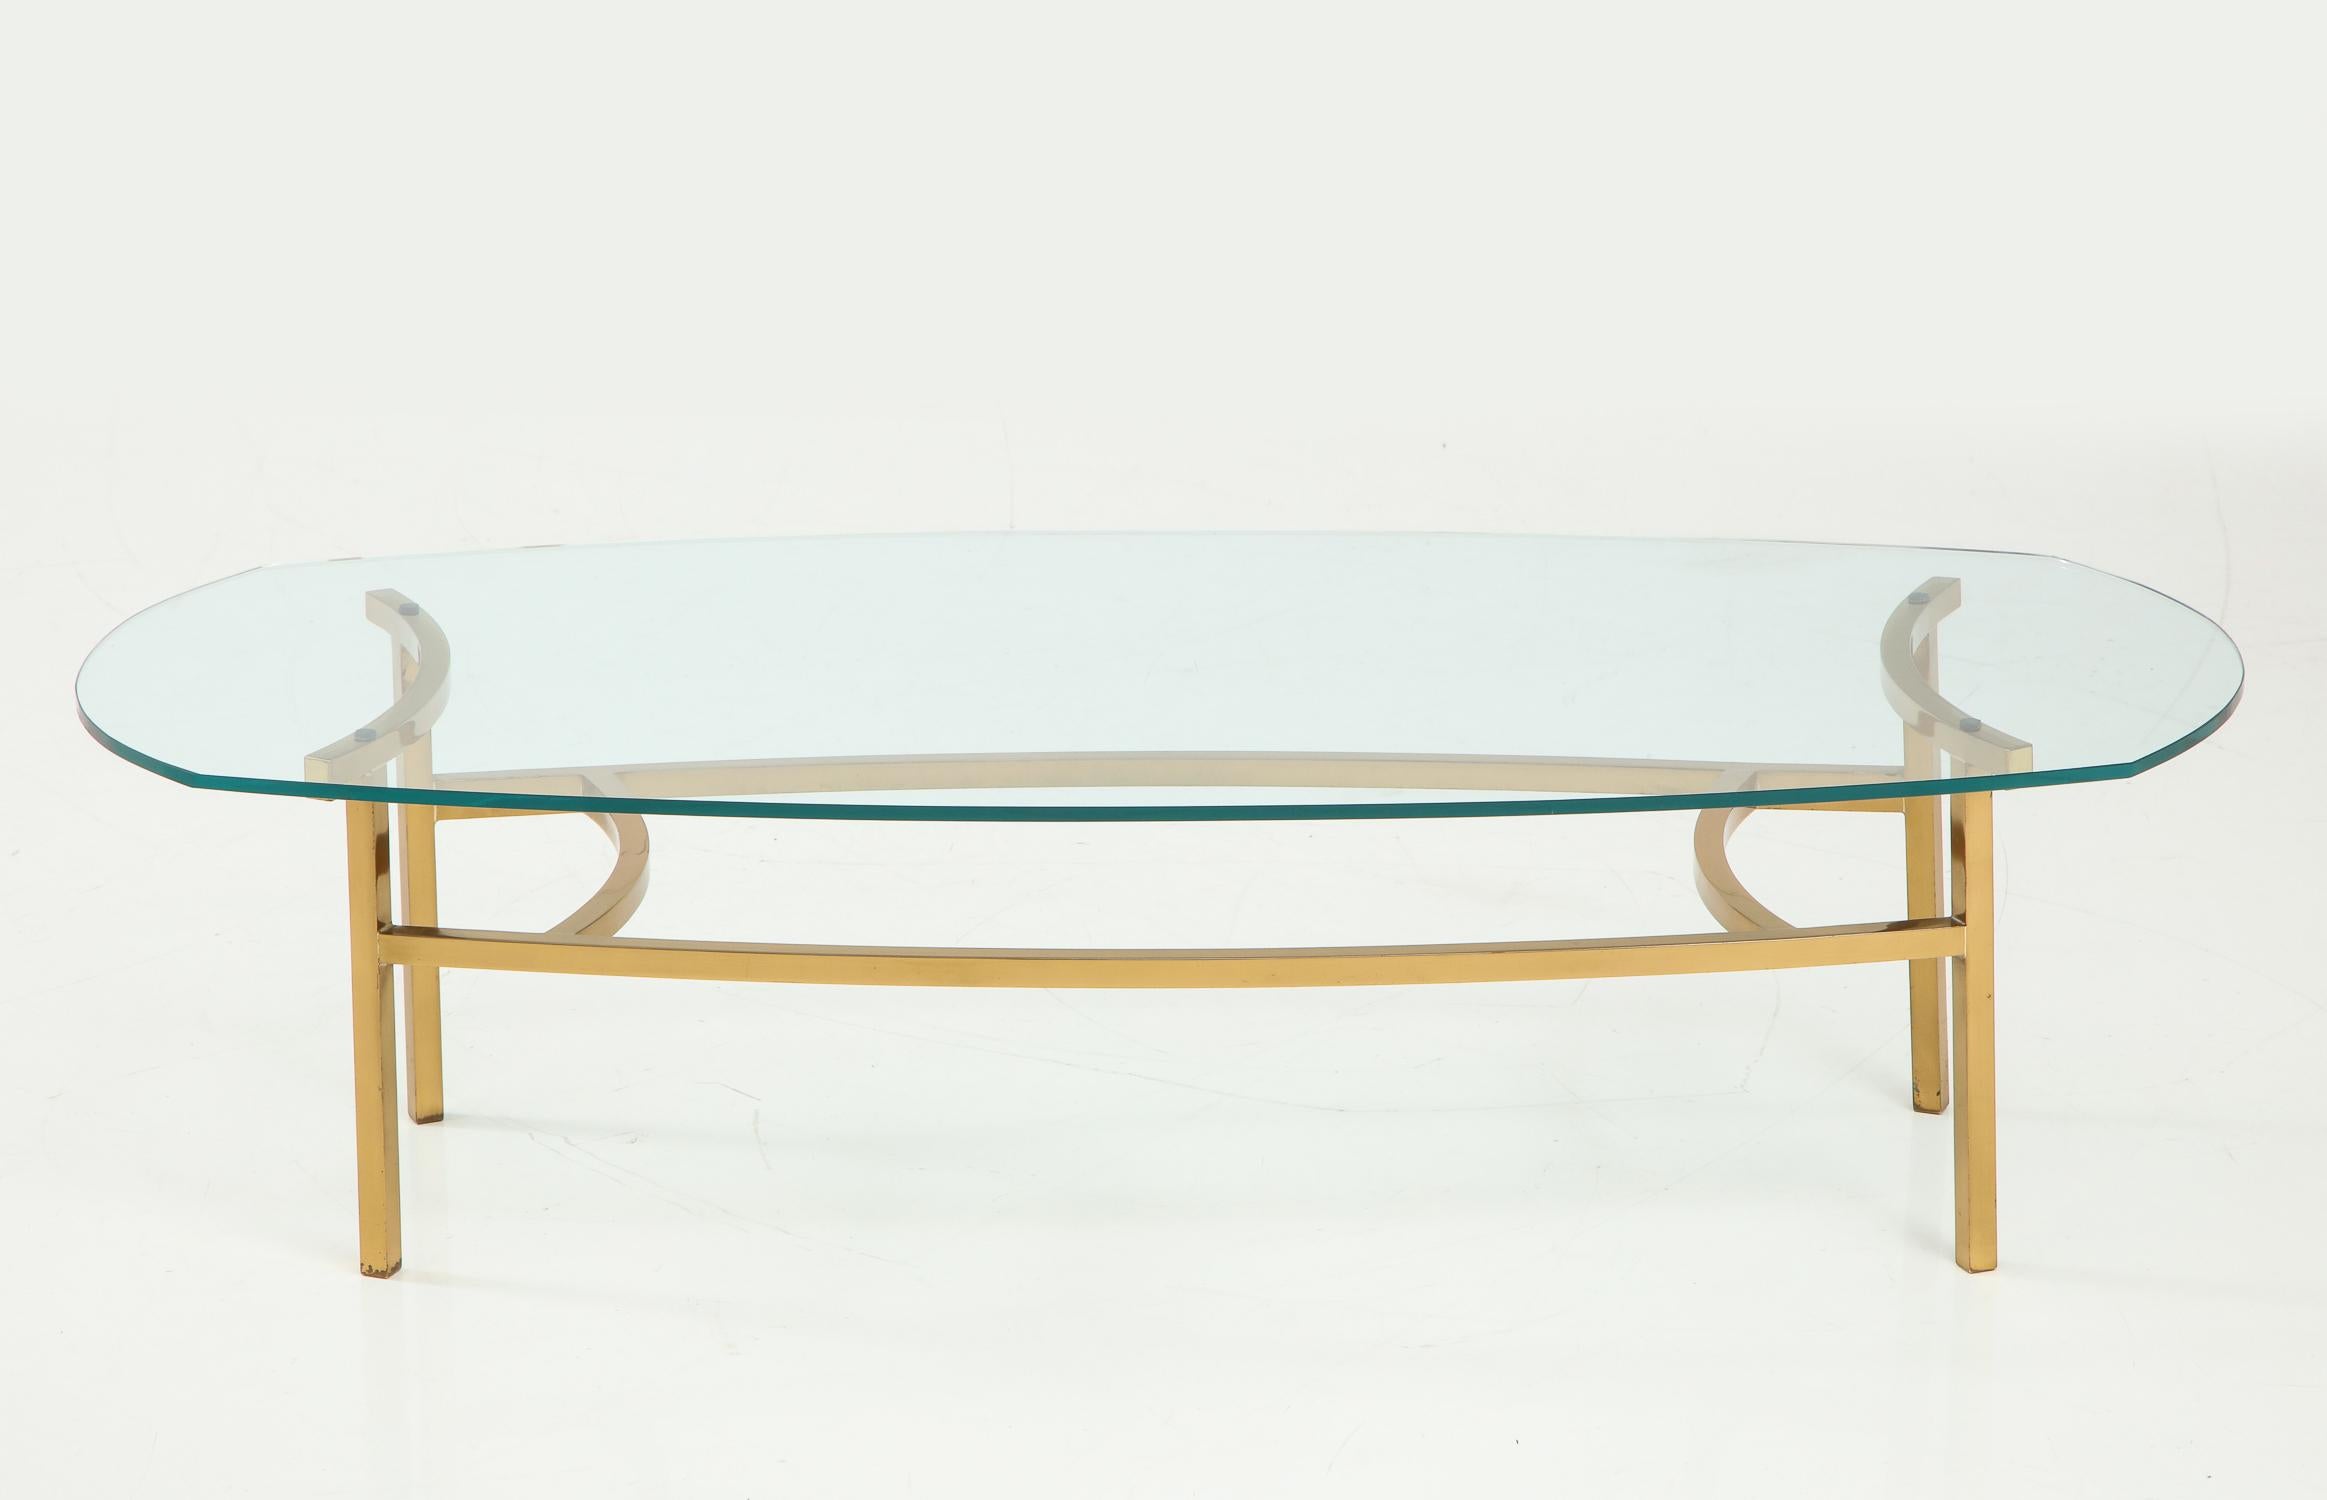 Spare and architectonic brass cocktail table with gently sinuous curves and original glass top. A Bertha Schaefer design for M. Singer and Sons, circa 1954. Rare to the market. Documented in “Modern Furnishings for the Home 2” by William J.